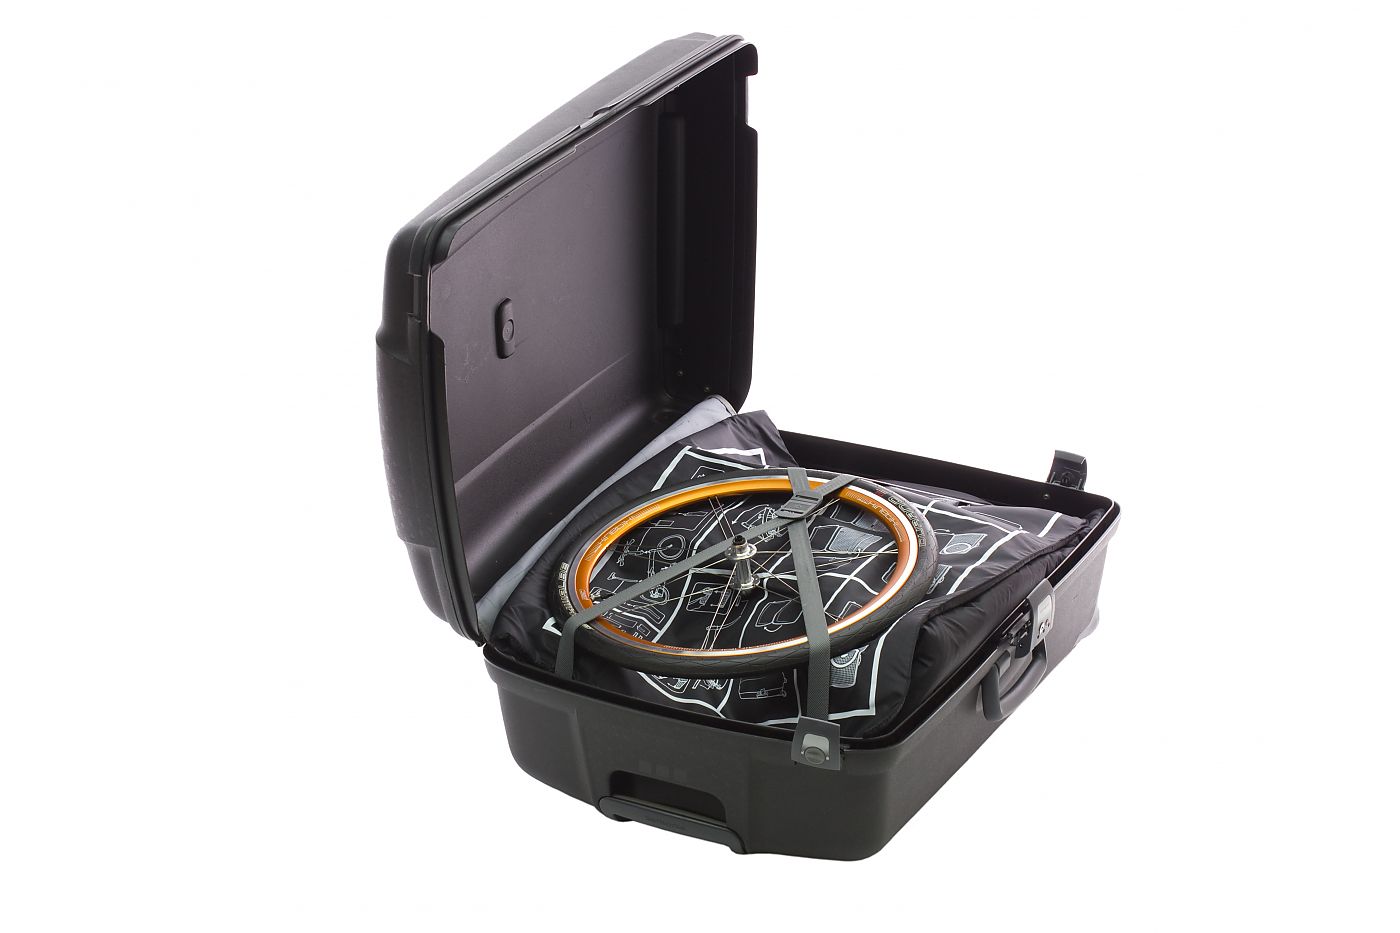 Tern kit allows bike to be packed in standard suitcase | Bicycle 